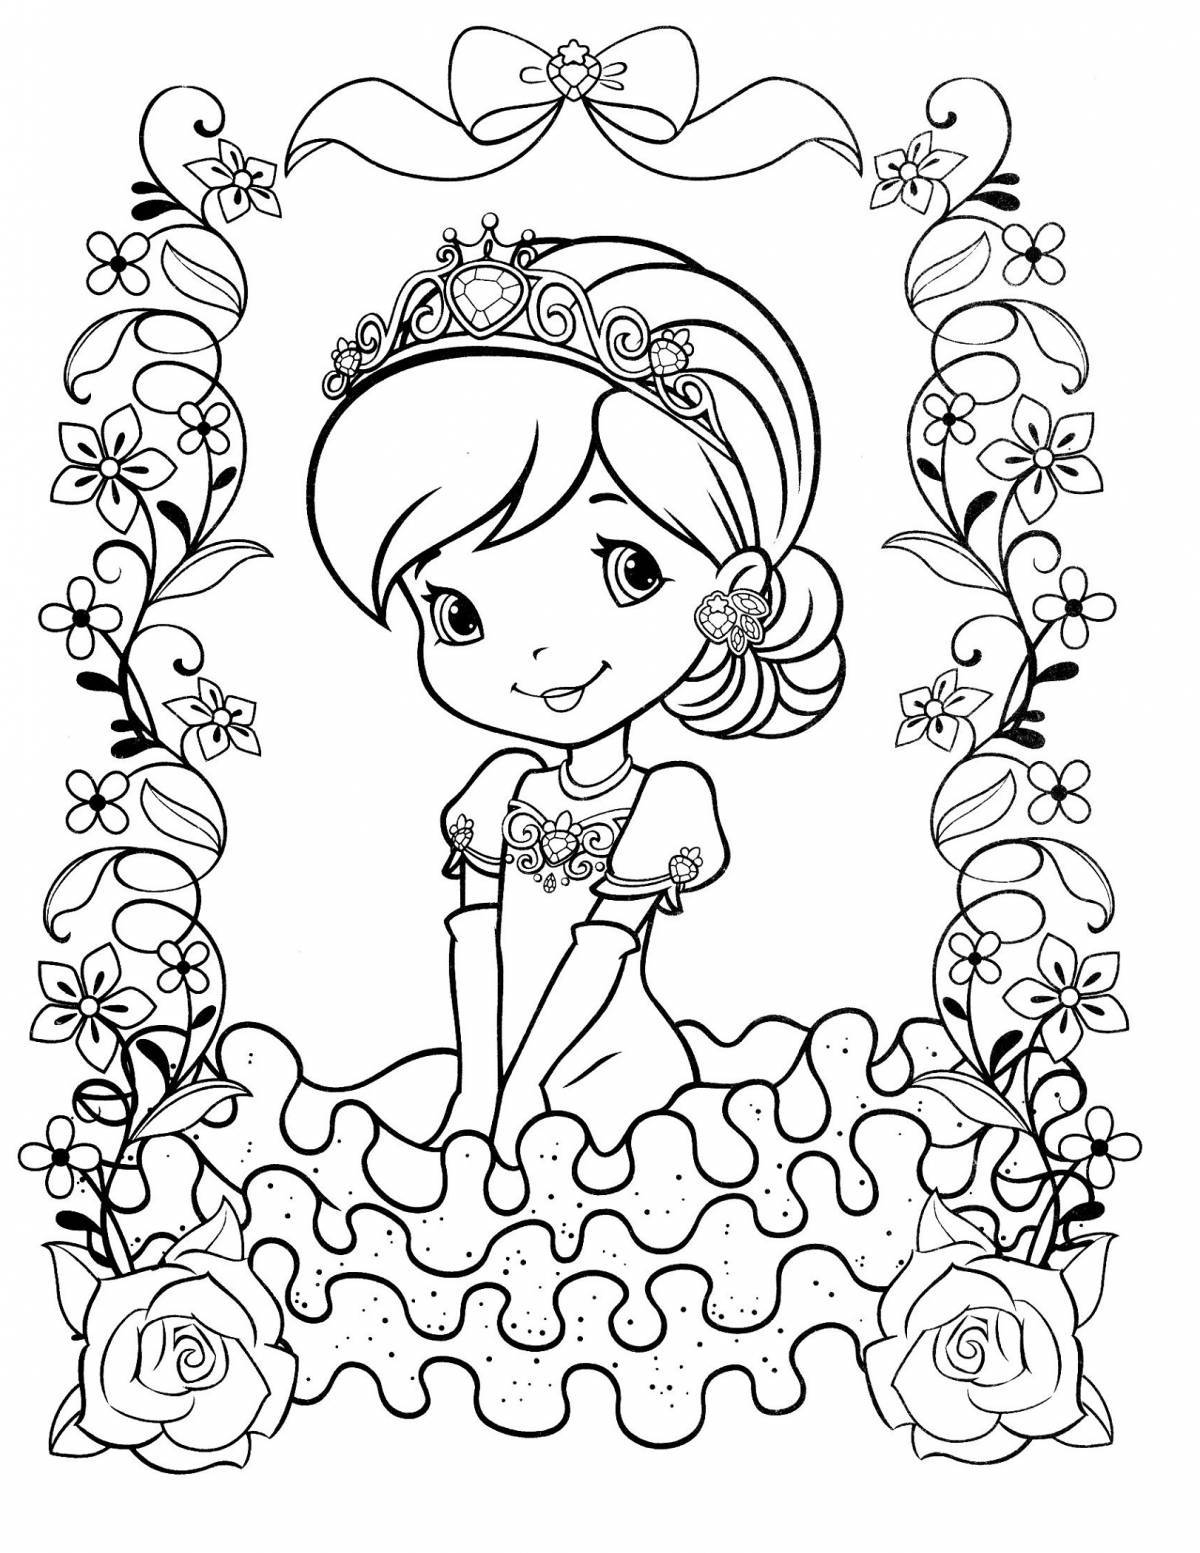 Great princess coloring pages for kids